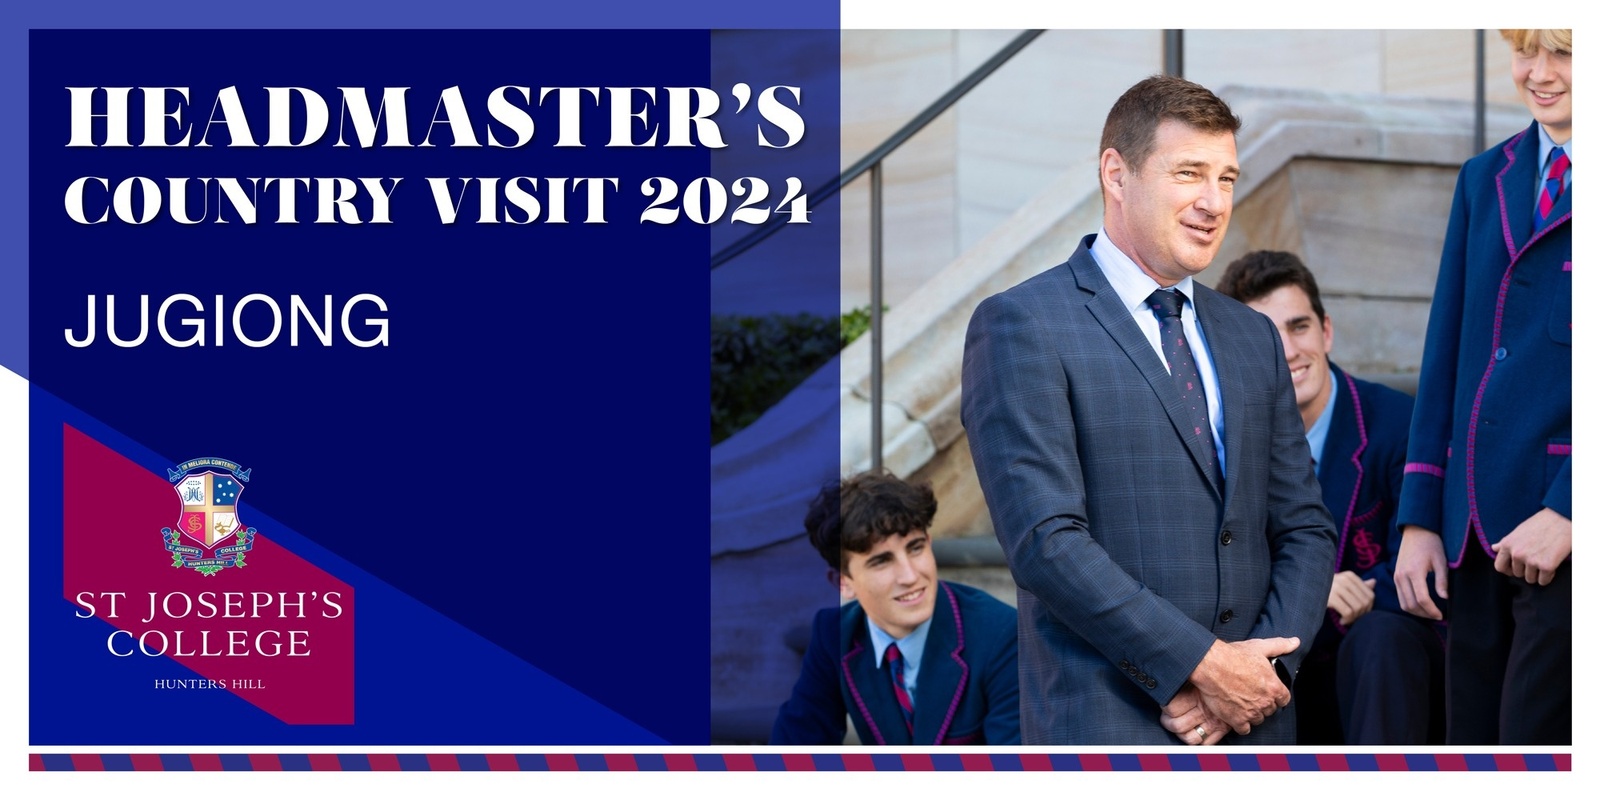 Banner image for 2024 Headmaster's Jugiong Country Visit